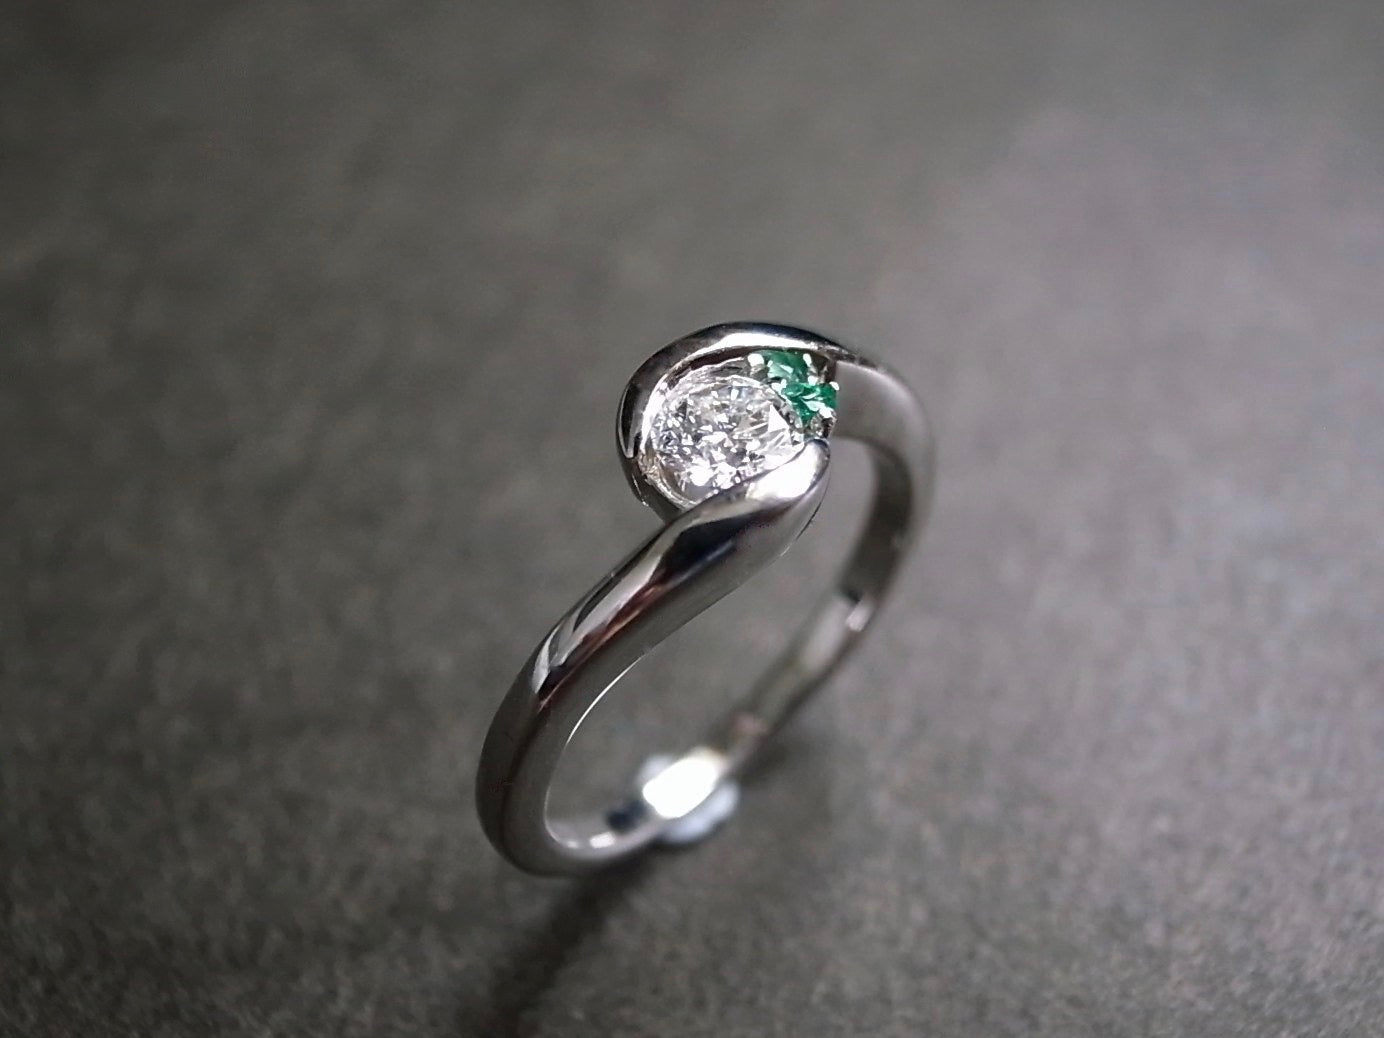 0.25ct Brilliant Cut Diamond and Emerald Engagement Ring in 18K White Gold - HN JEWELRY